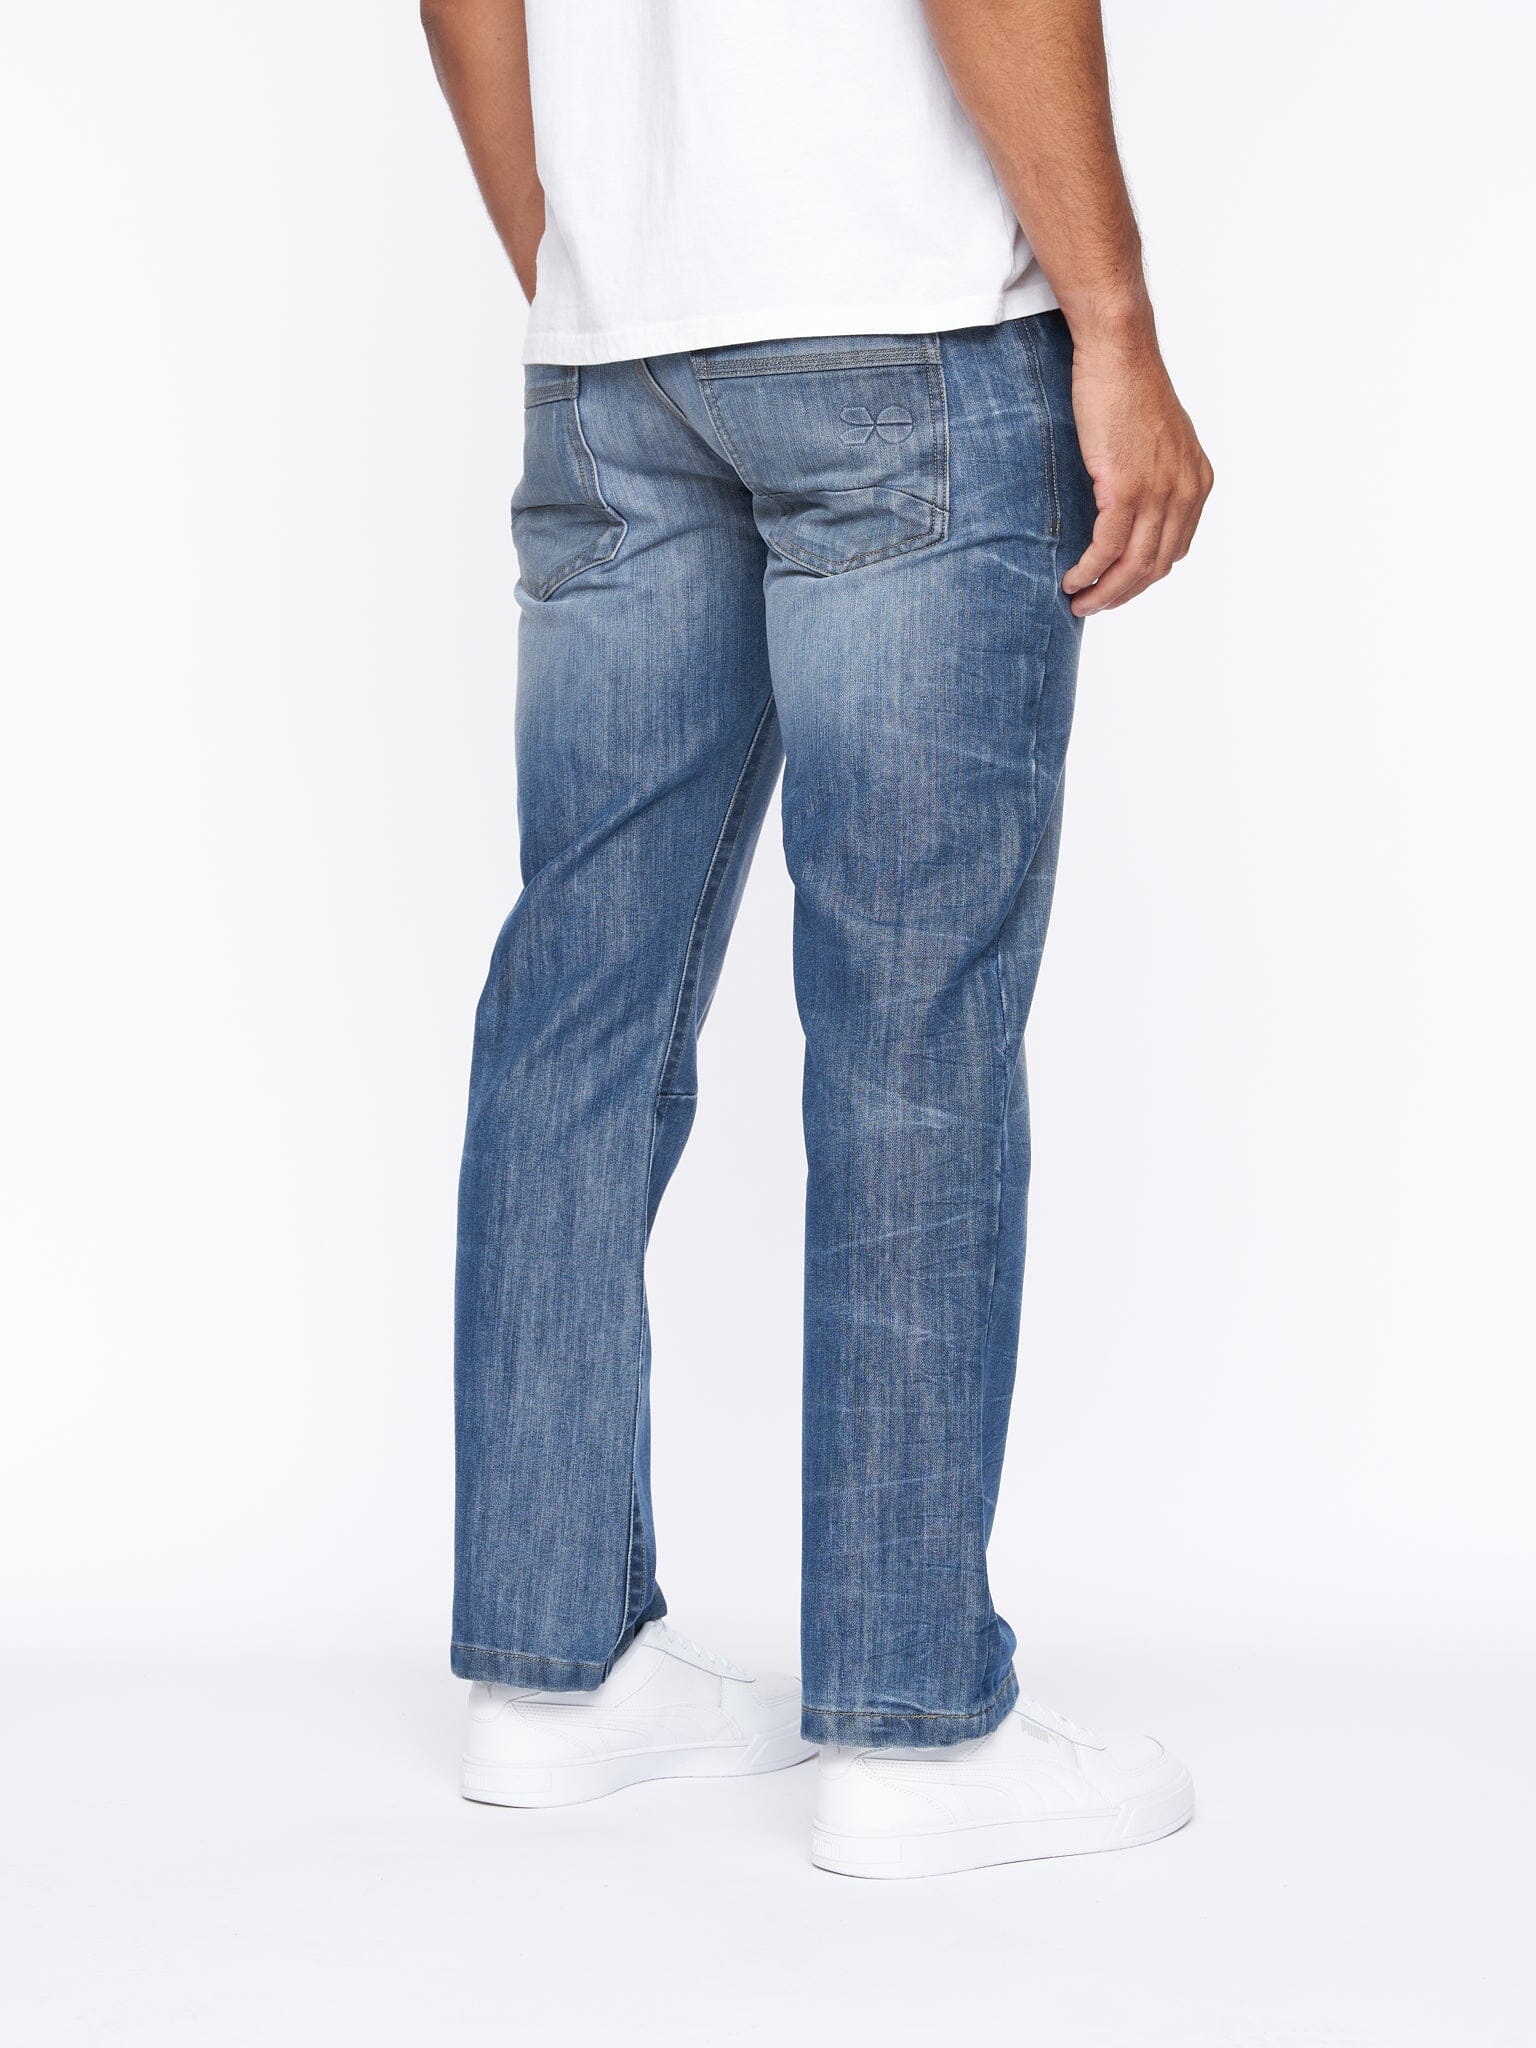 Crosshatch Mens New Baltimore Jeans Mid Wash